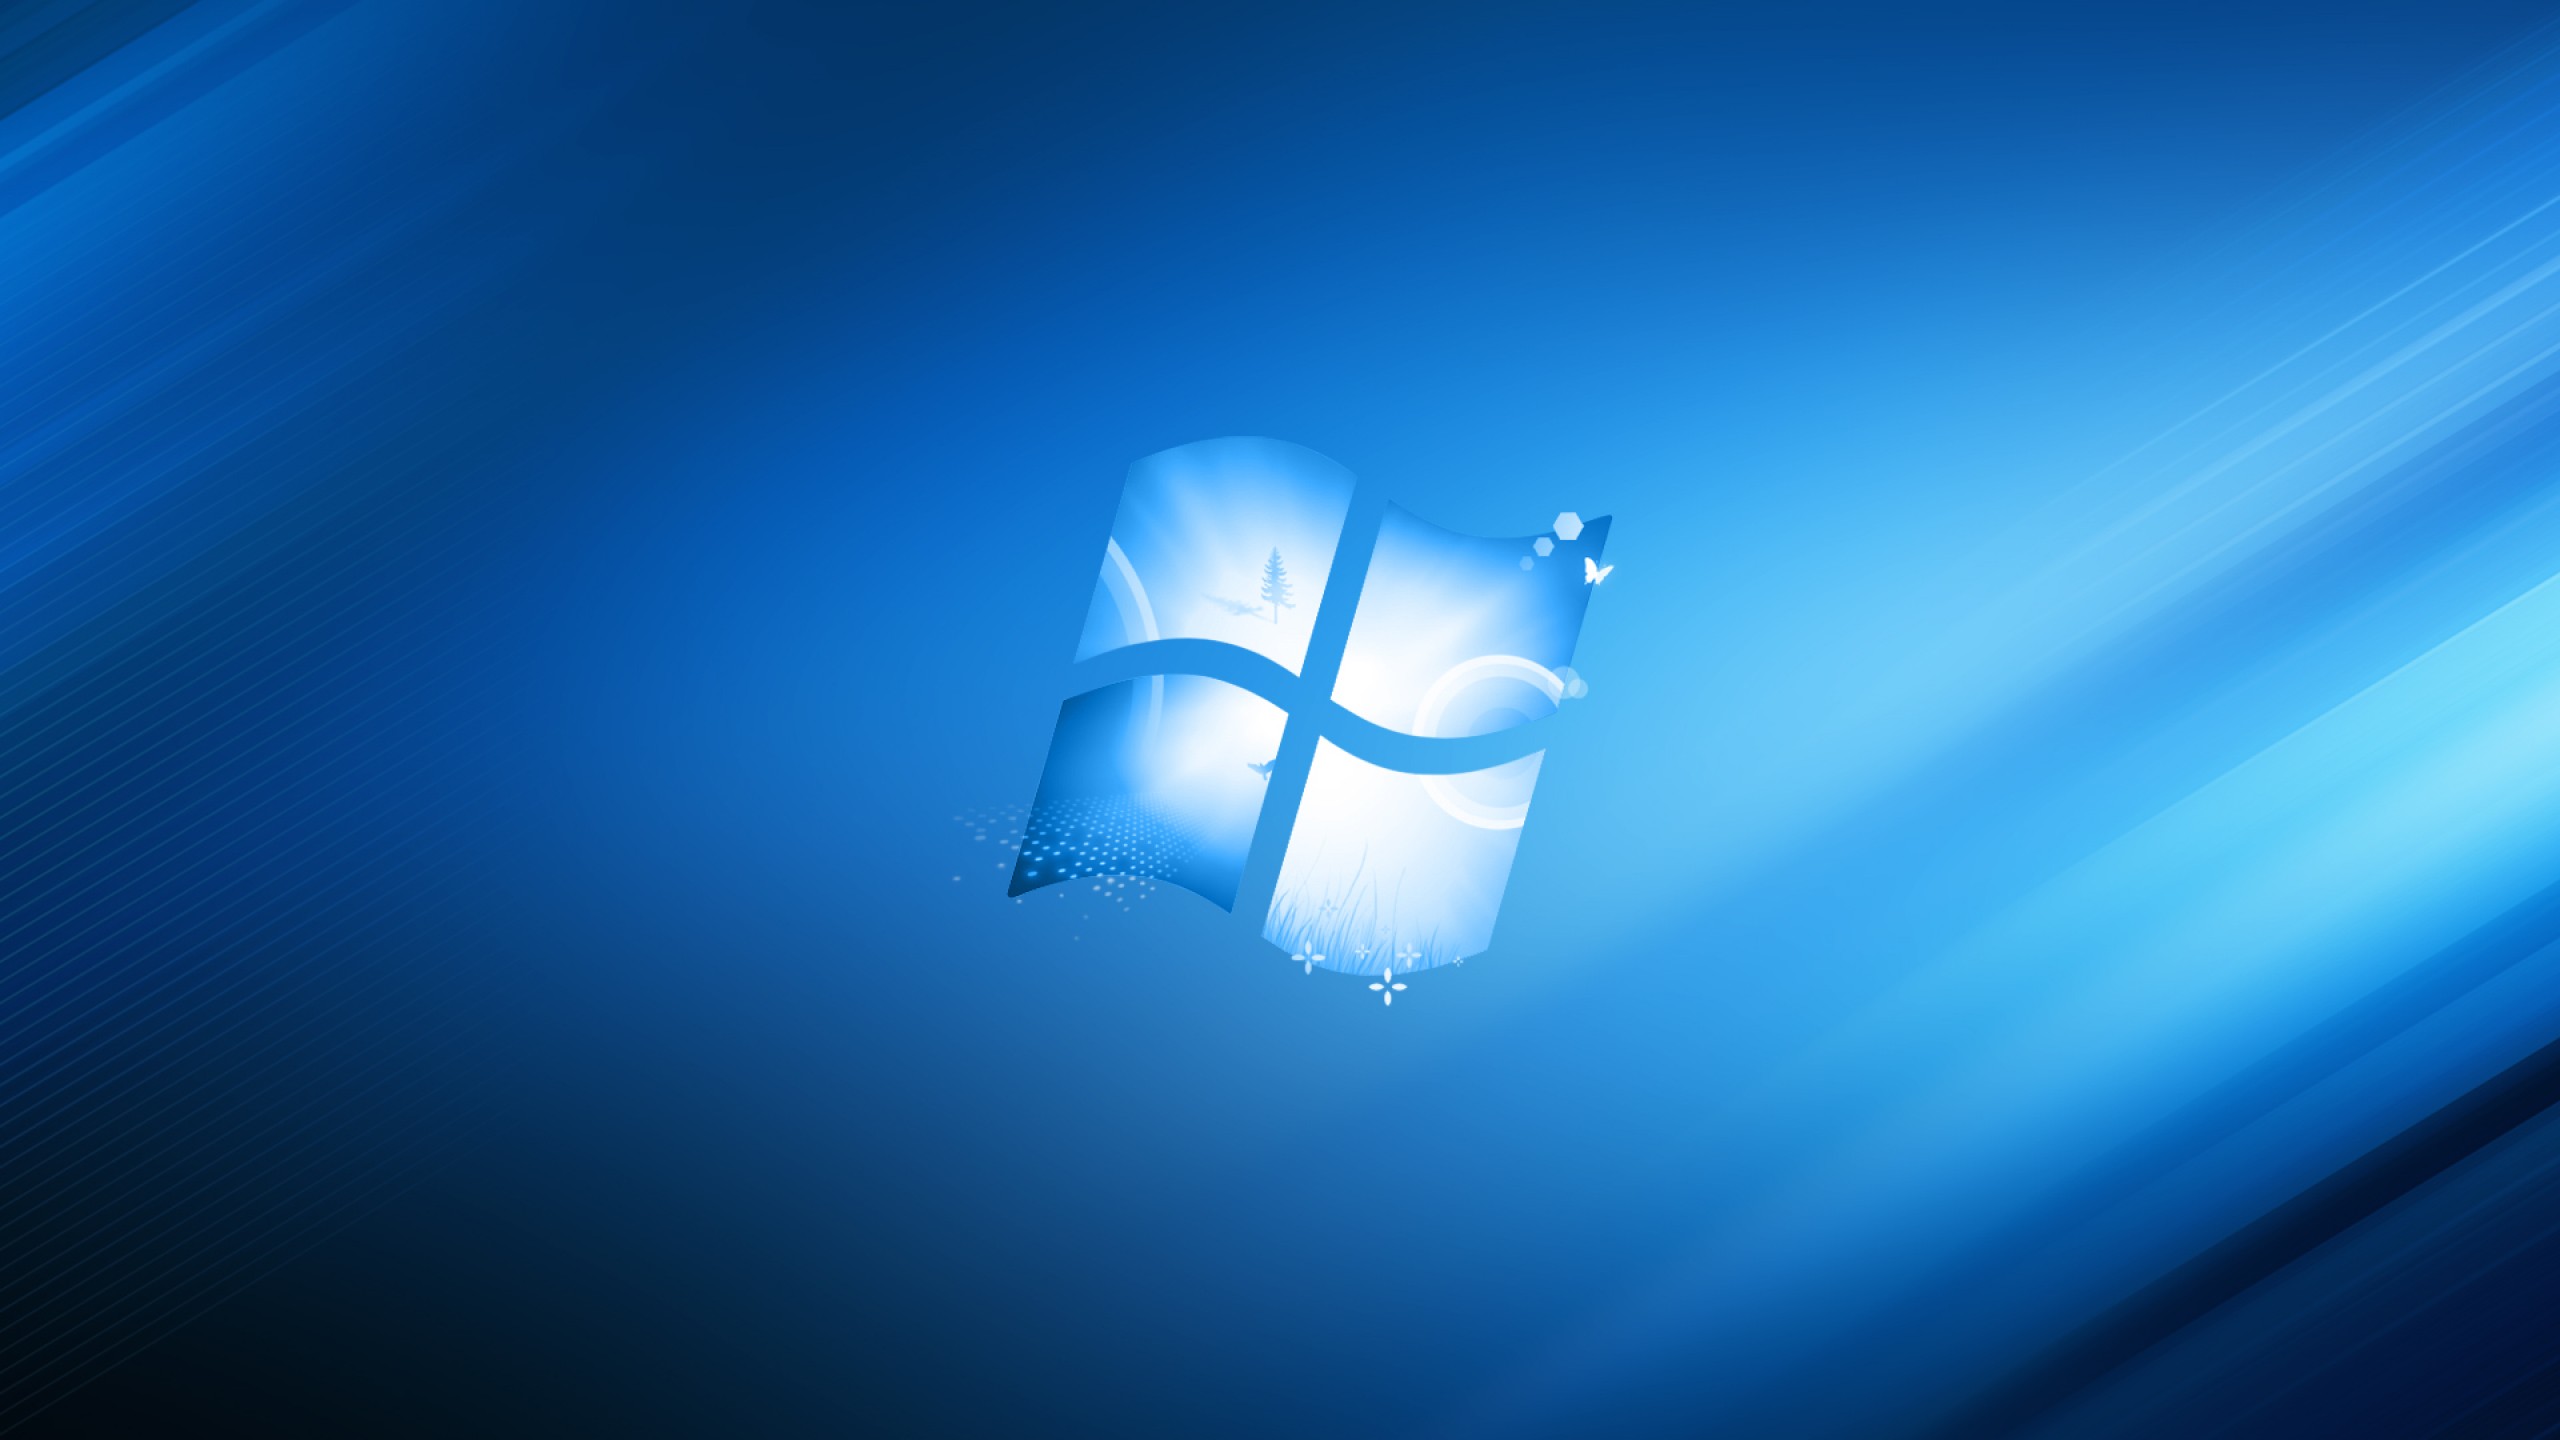 Cool Wallpaper for Windows 10